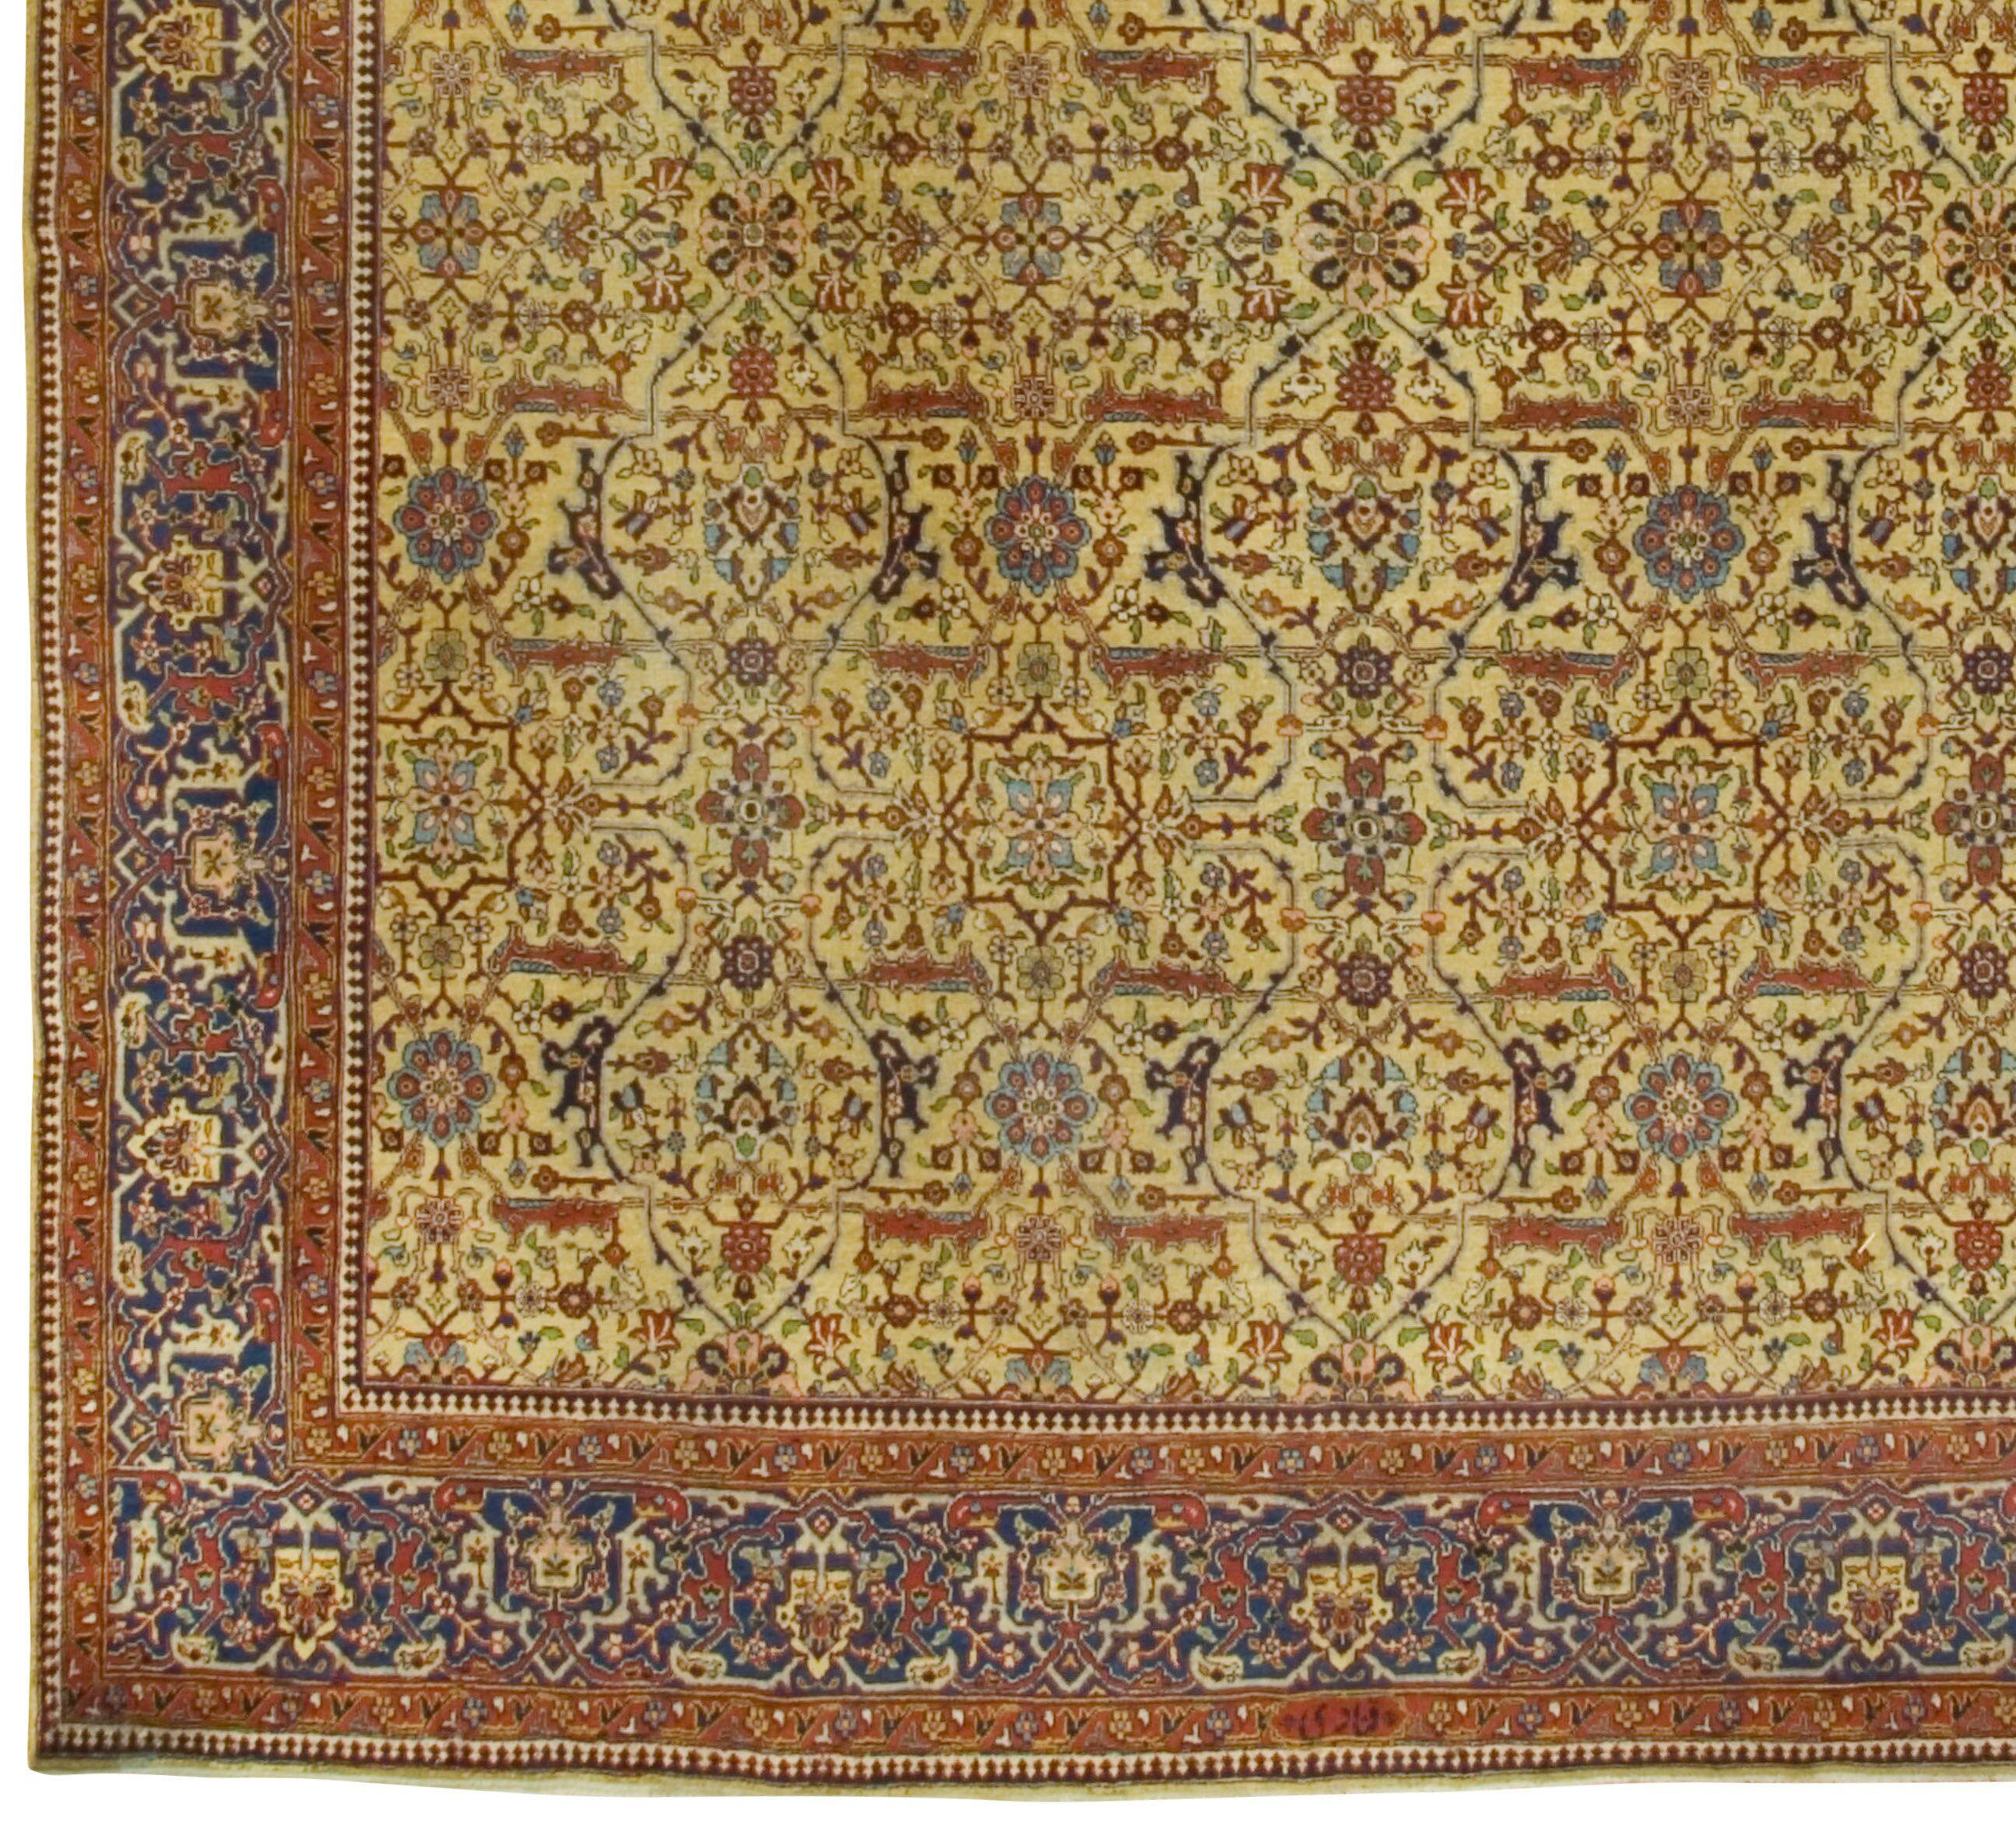 Antique Persian Tabriz rug, 10' x 12'6. Tabriz is the capital of the north-western province of Azerbaijan in Northwest Persia and for centuries has enjoyed a great reputation as a center of Oriental culture. Genghis Kahn conquered the town in the